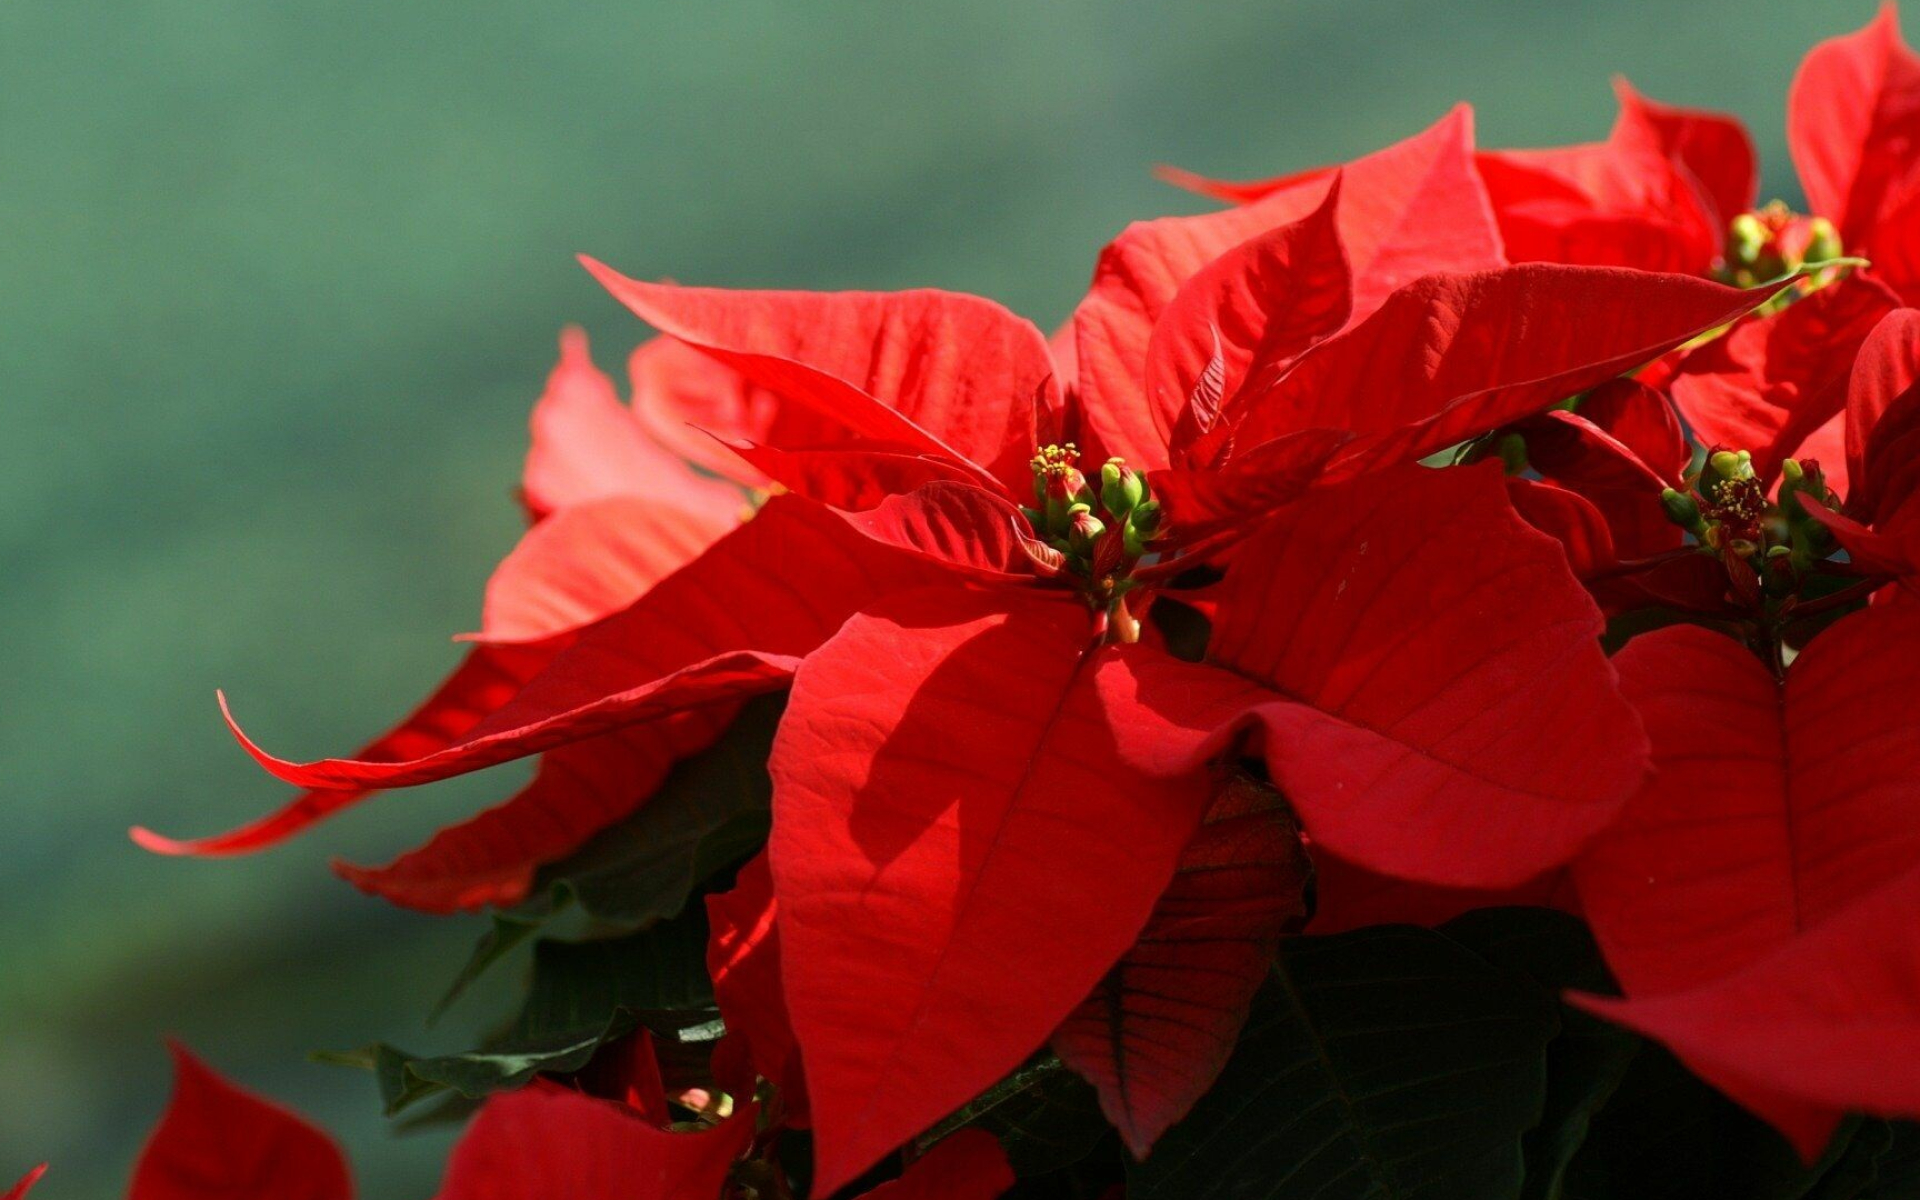 Poinsettia: A well-known member of the spurge family, commonly sold as an ornamental at Christmastime. 1920x1200 HD Wallpaper.